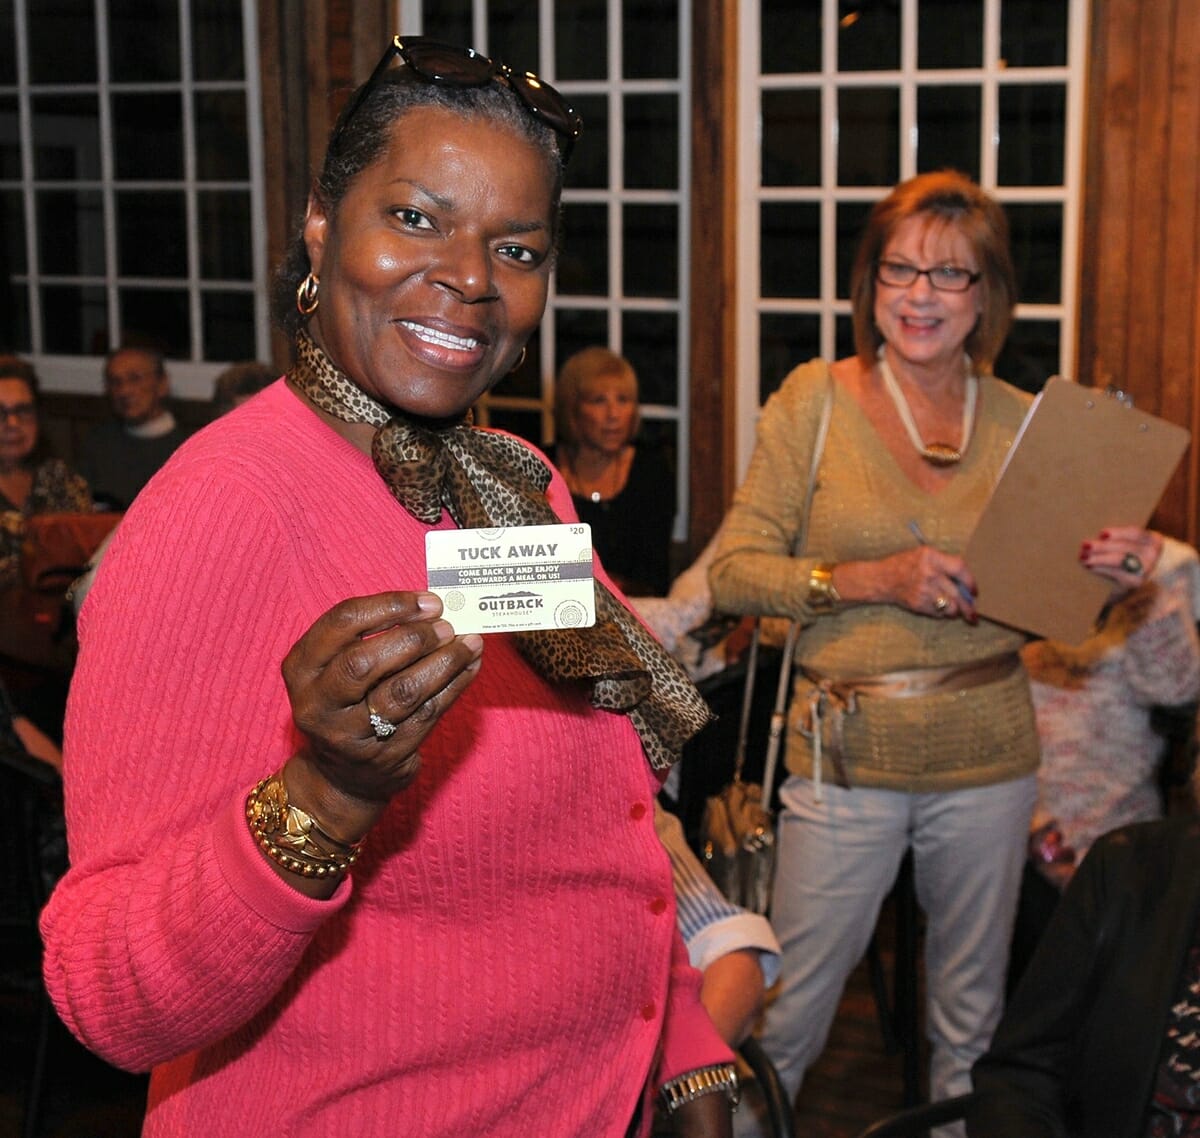 Patricia Gadsden continued her lucky streak by winning another door prize from Outback. Gadsden said she has won a door prize each time she has attended Island Girls Night Out.